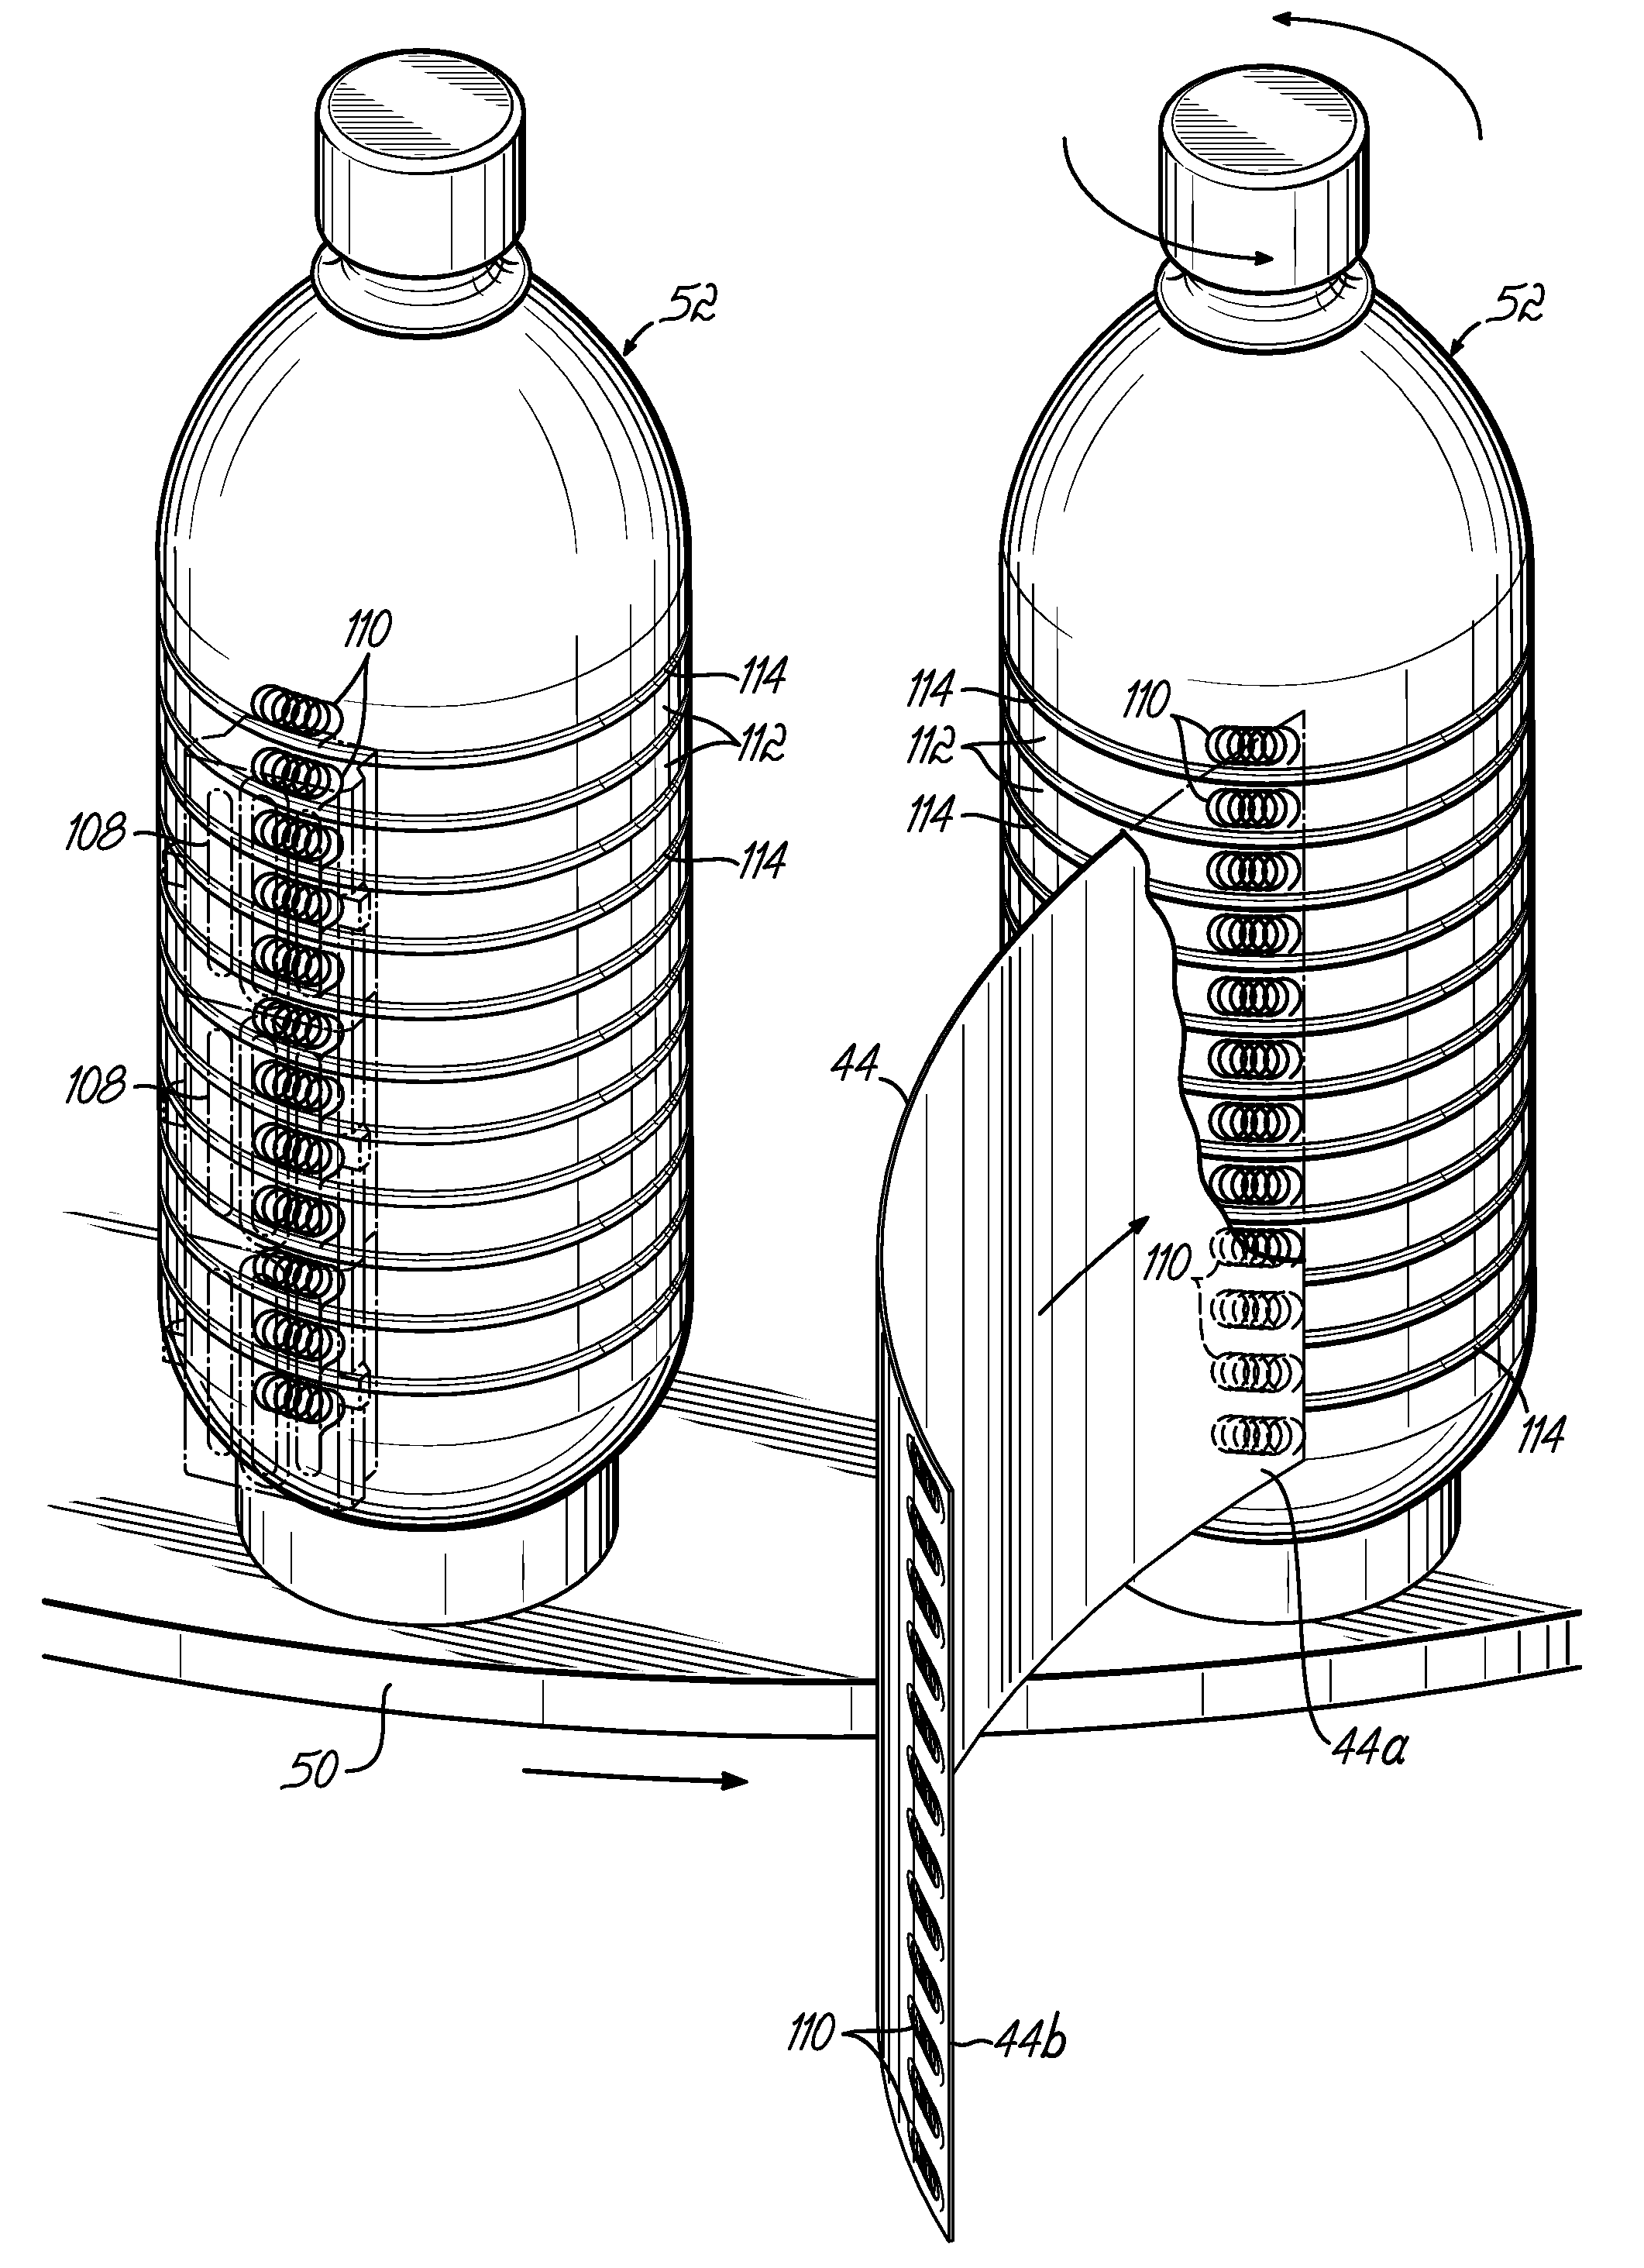 Apparatus and process to apply adhesive during labeling operations